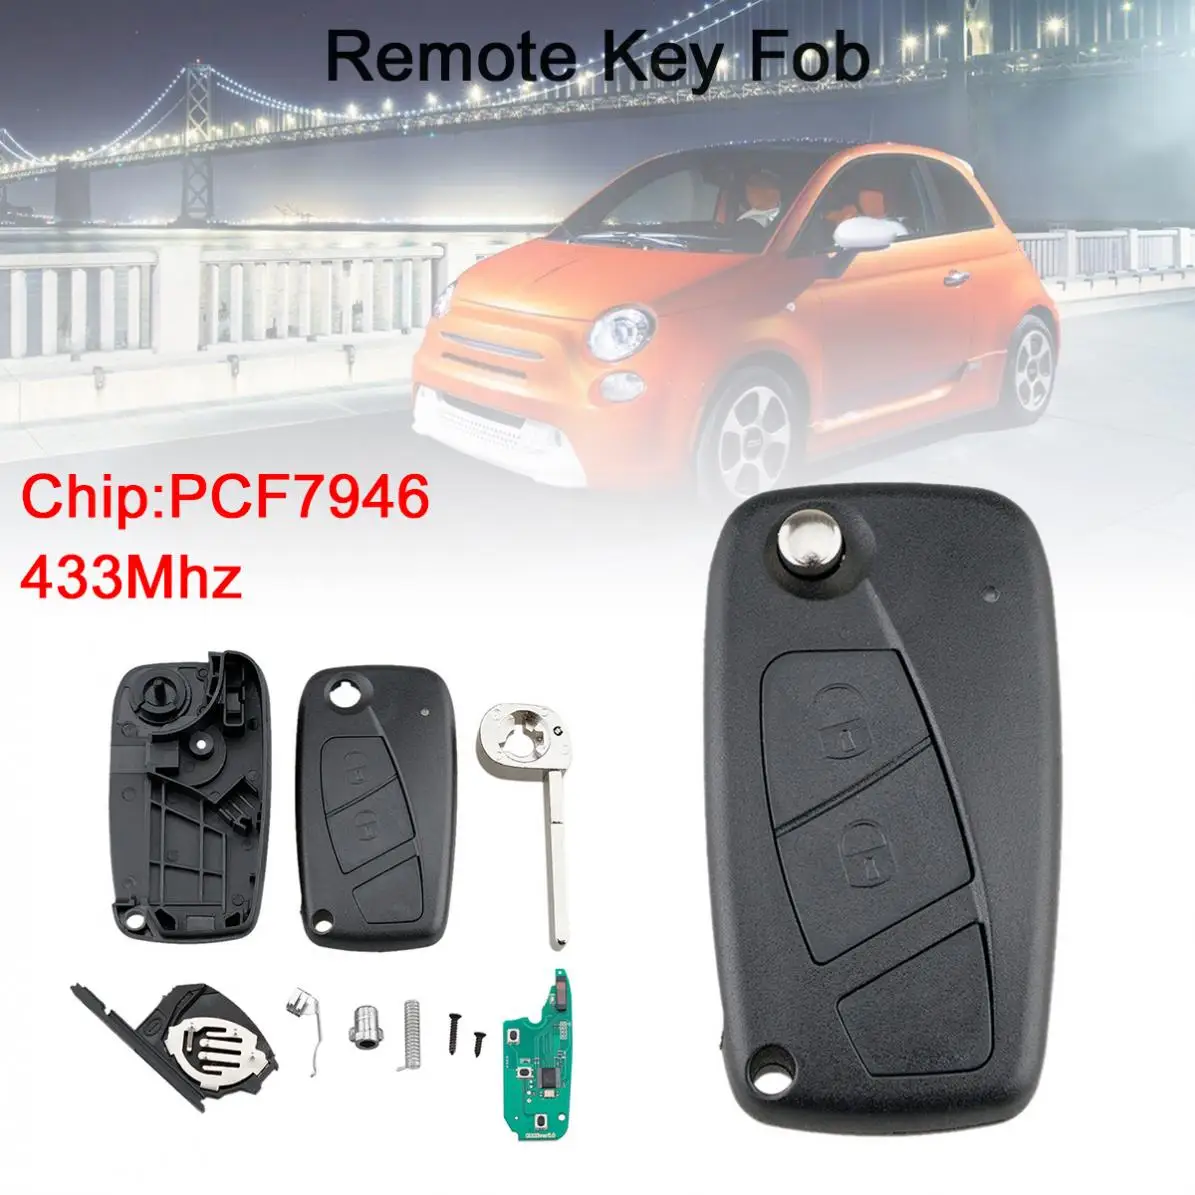 

433Mhz 2 Buttons Flip Car Remote Key Fob with PCF7946 Chip Black Fit for Fiat 500 Panda / Punto / Bravo